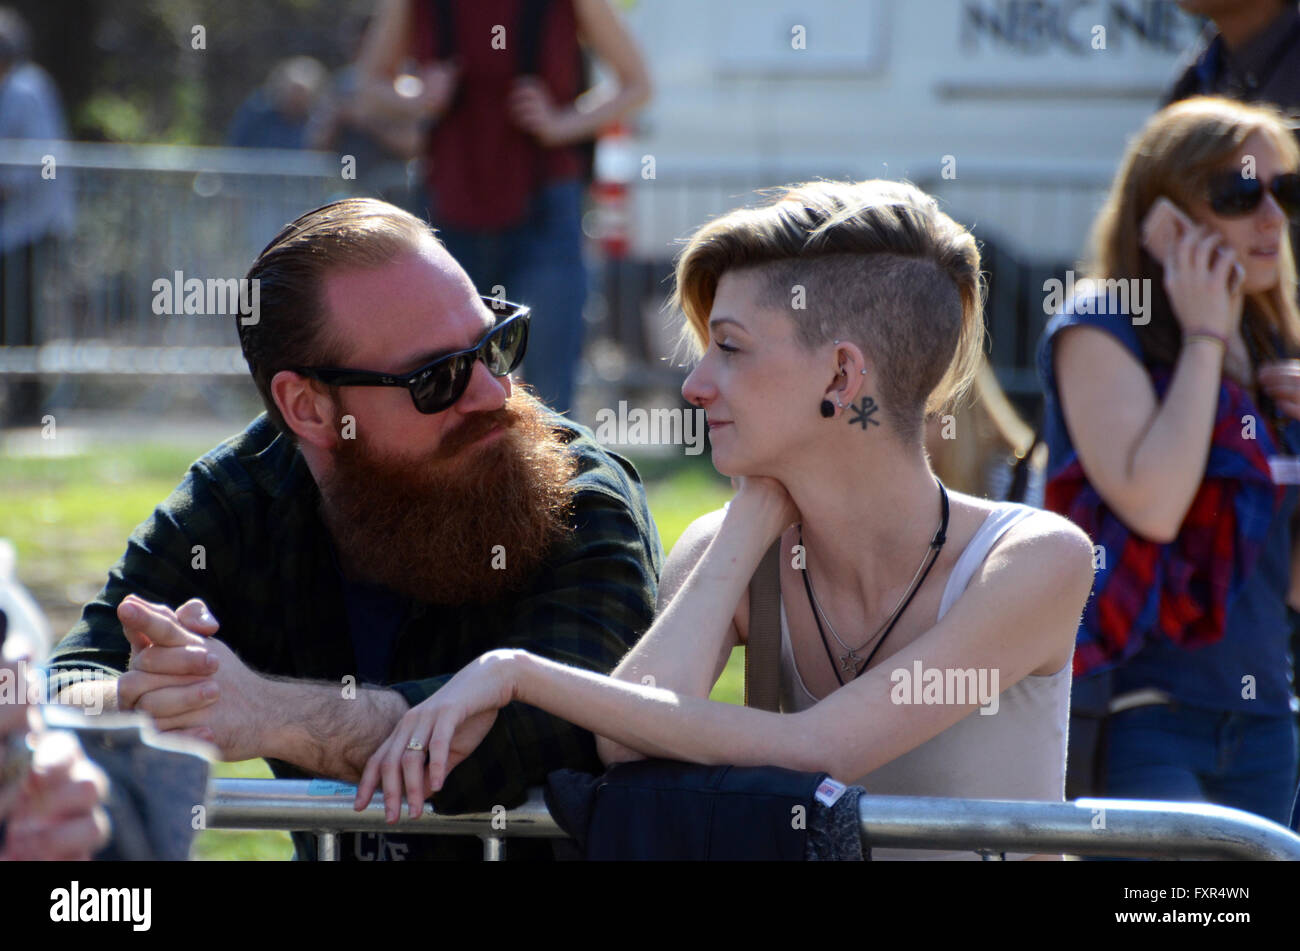 Brooklyn, New York, USA. 17th April, 2016. hipsters at Bernie Sanders Prospect Park Brooklyn april 17th 2016 Credit:  simon leigh/Alamy Live News Stock Photo